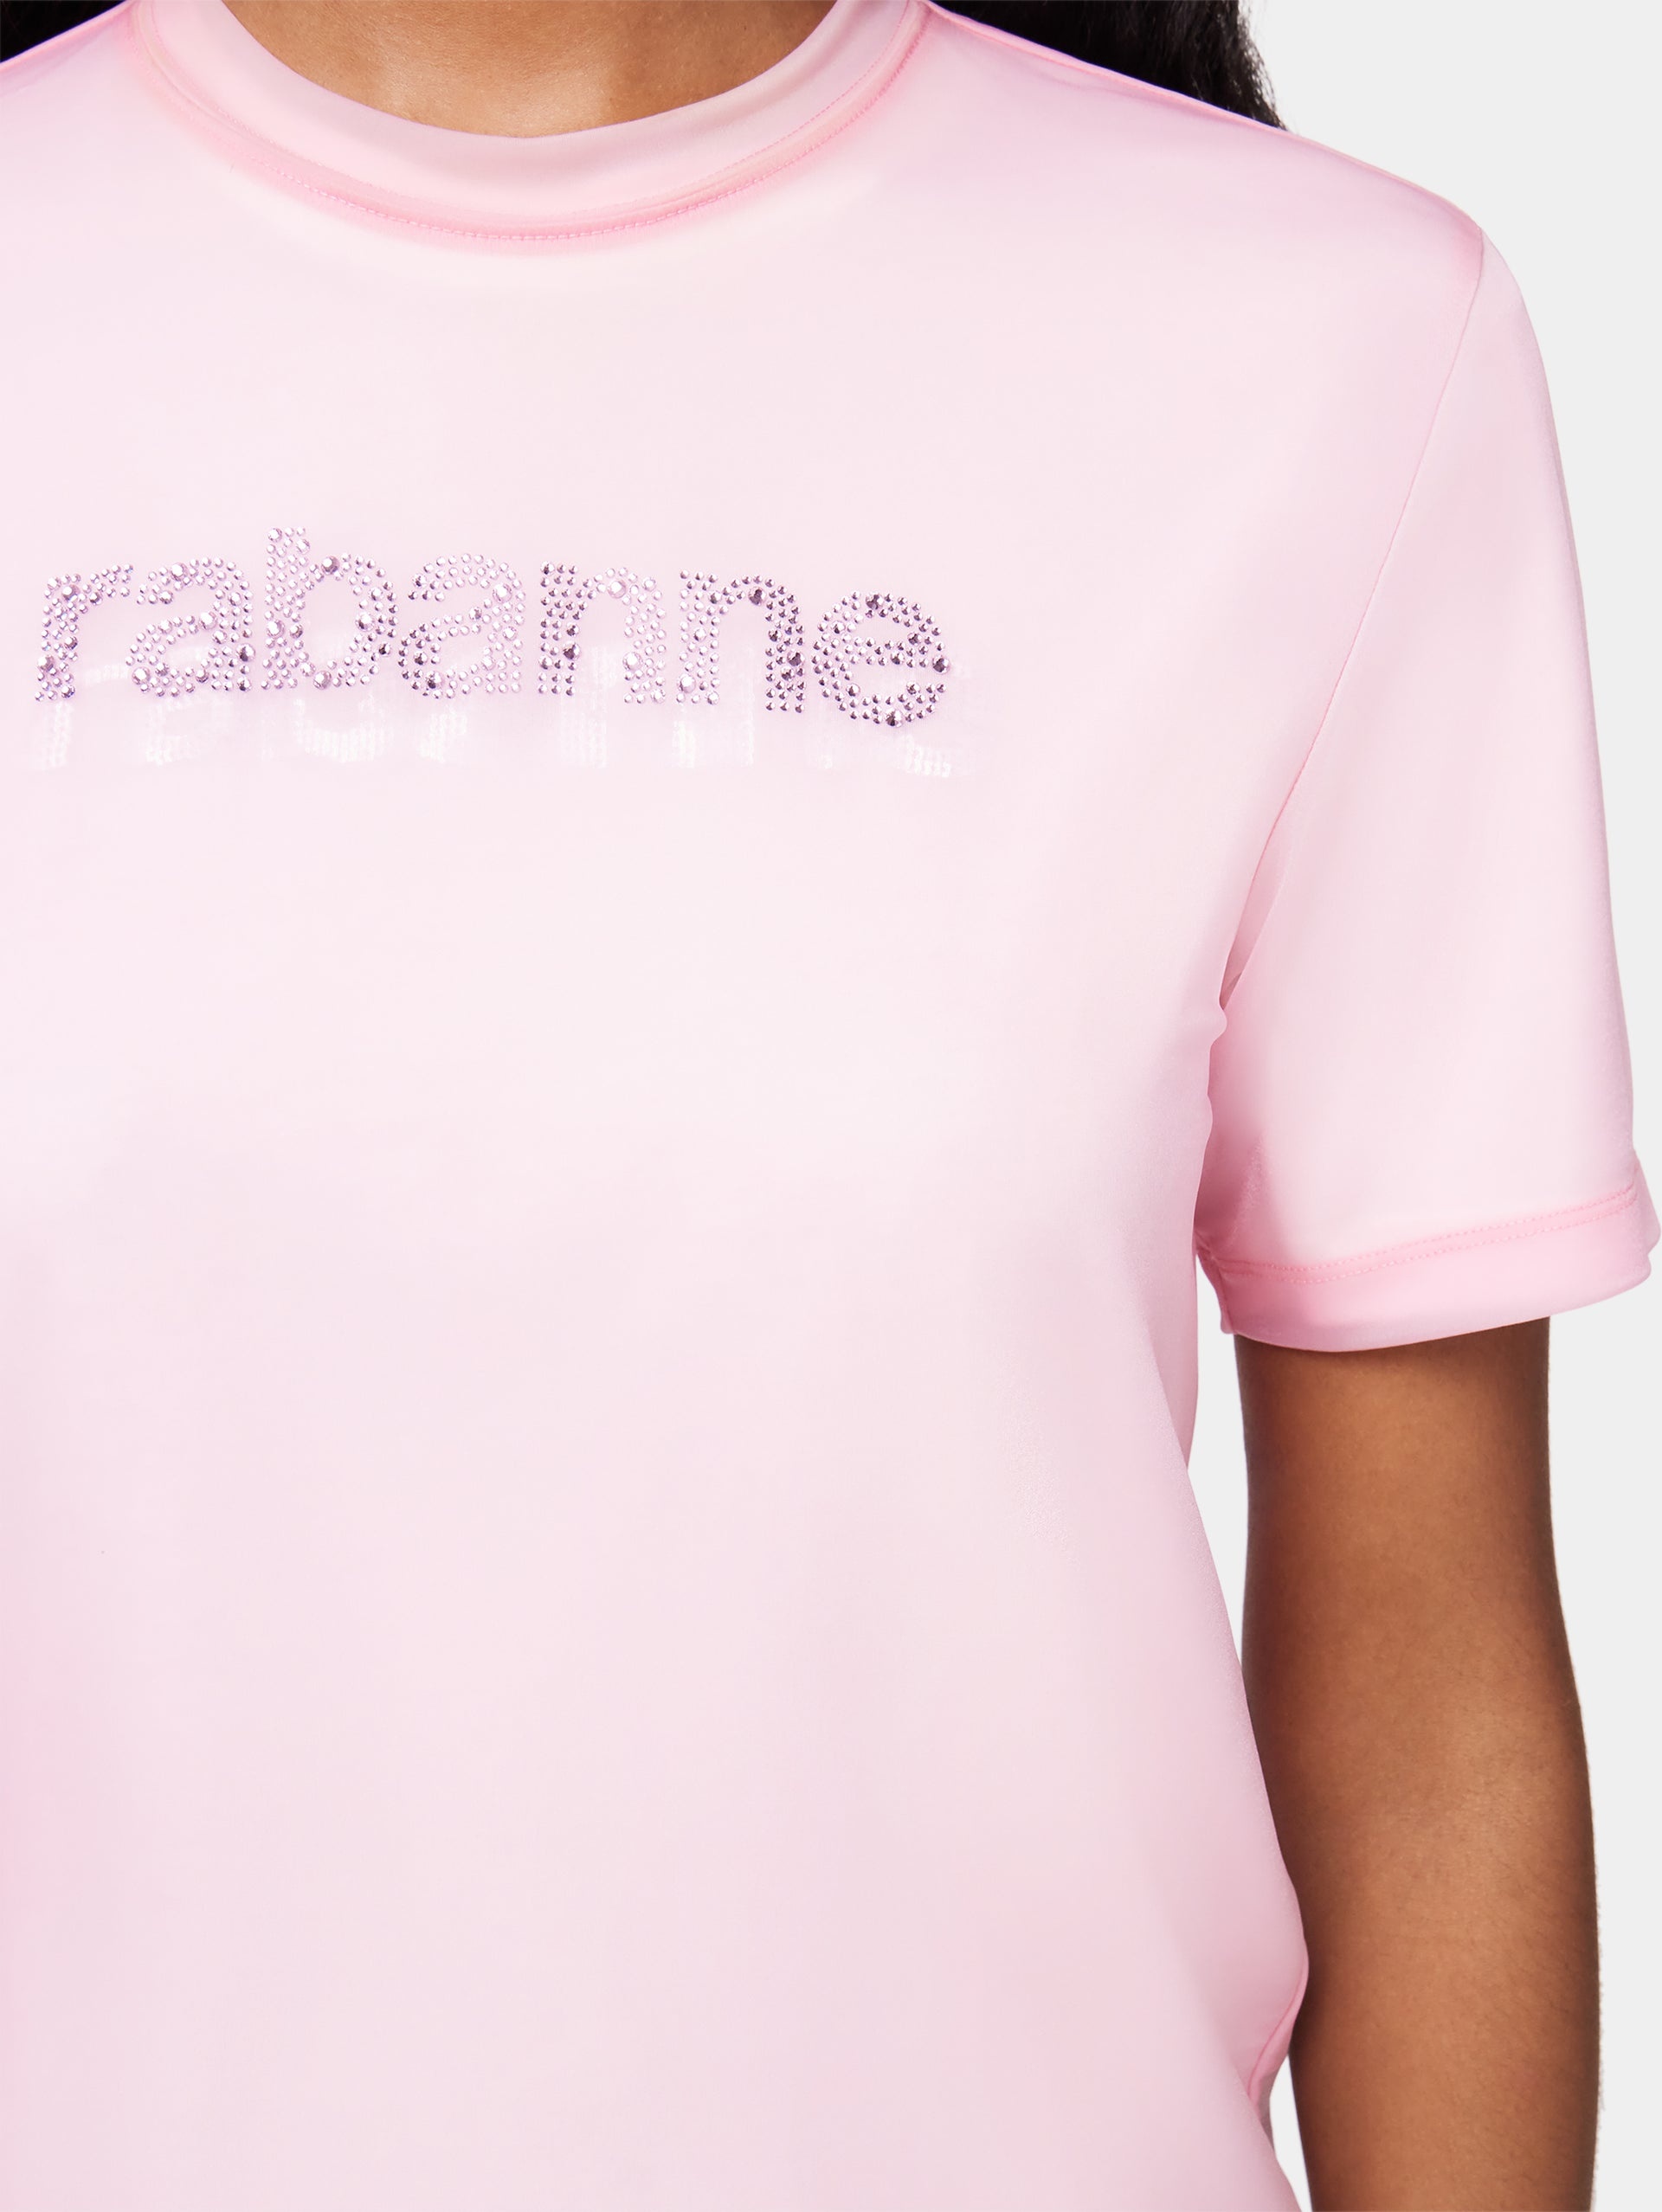 PINK FADED LOGO-PRINTED TOP - 3